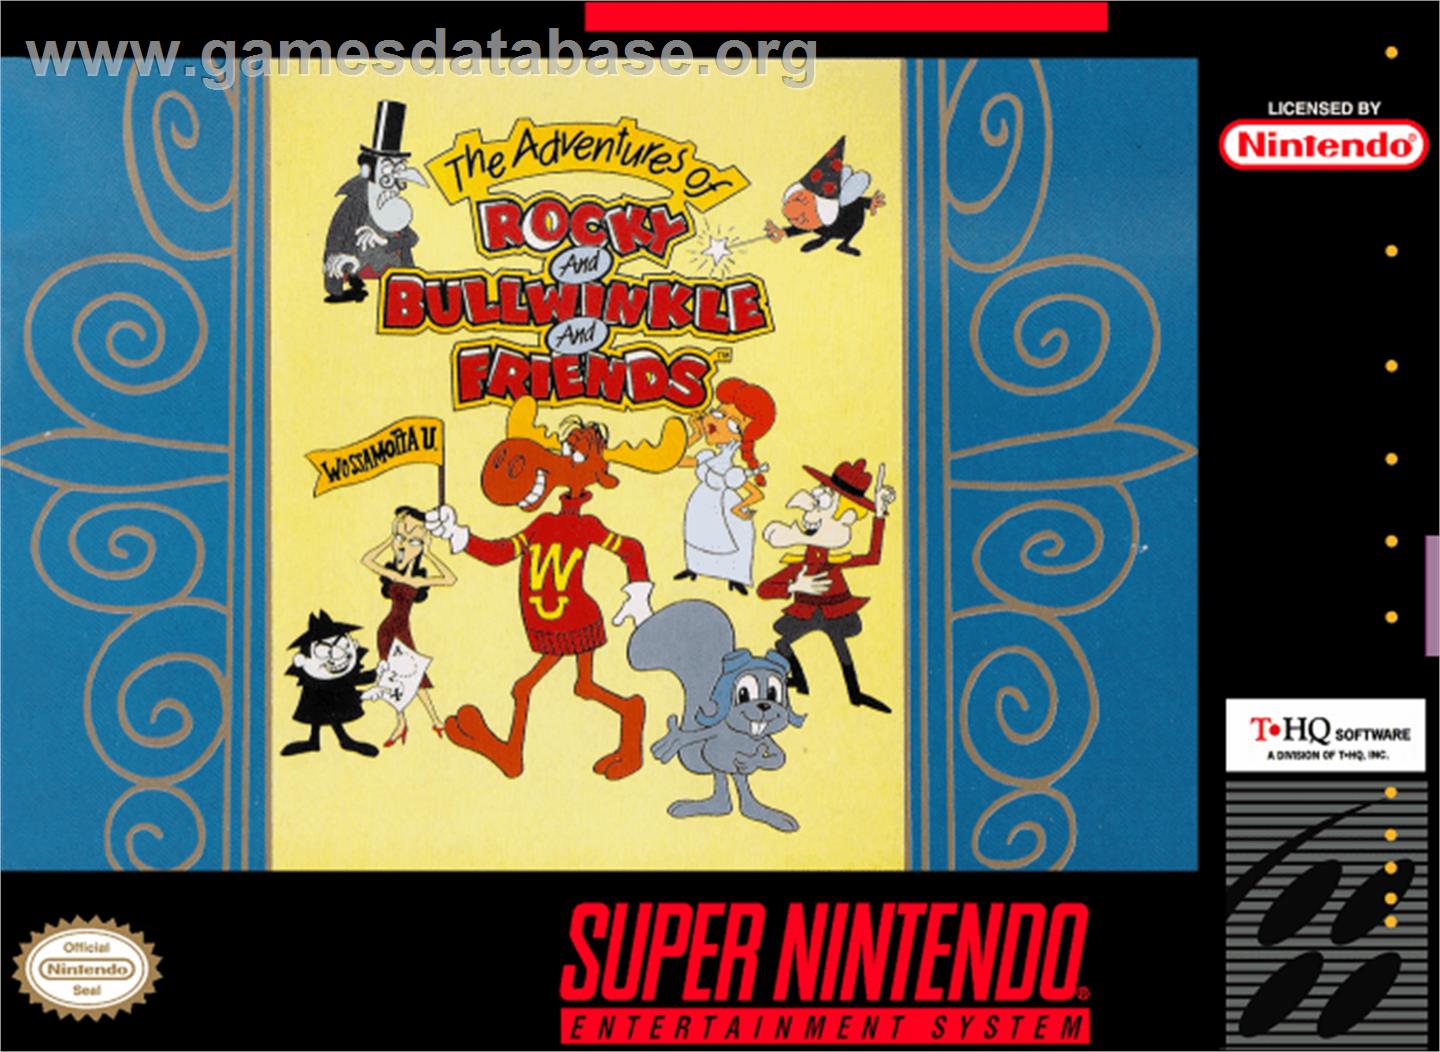 The Adventures of Rocky and Bullwinkle & Friends - Nintendo SNES - Artwork - Box